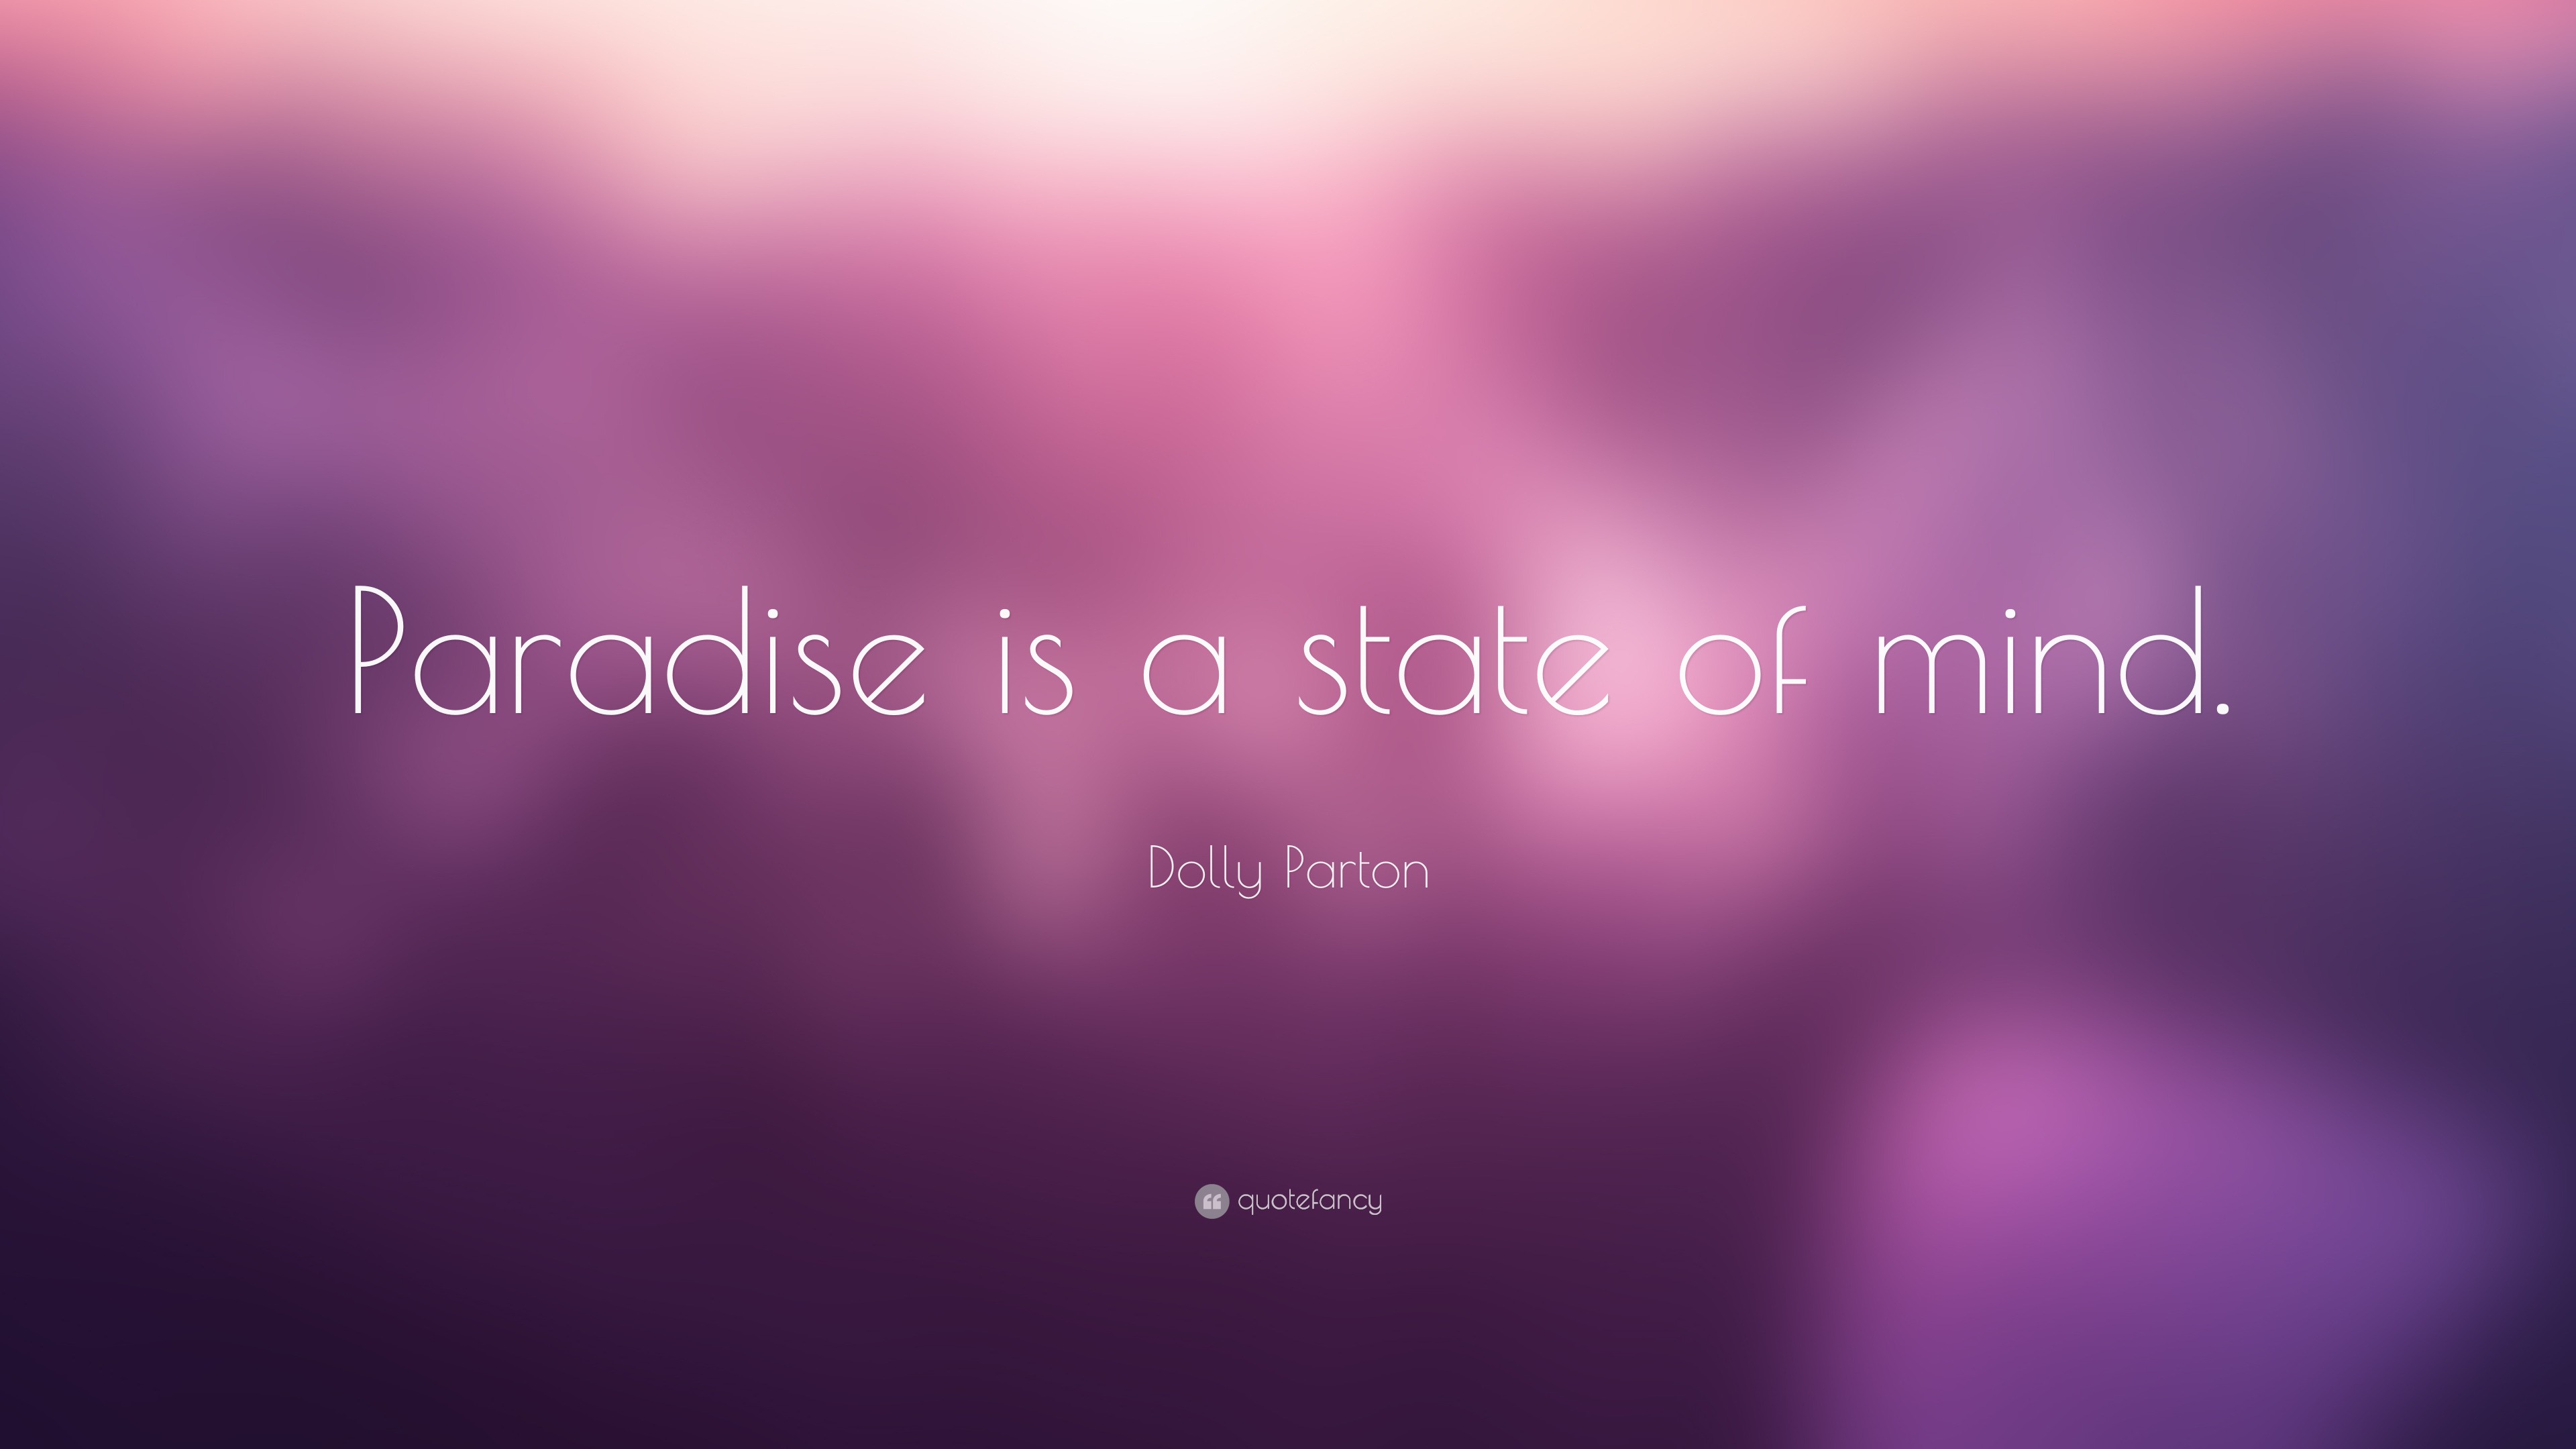 Dolly Parton quote: Paradise is a state of mind.